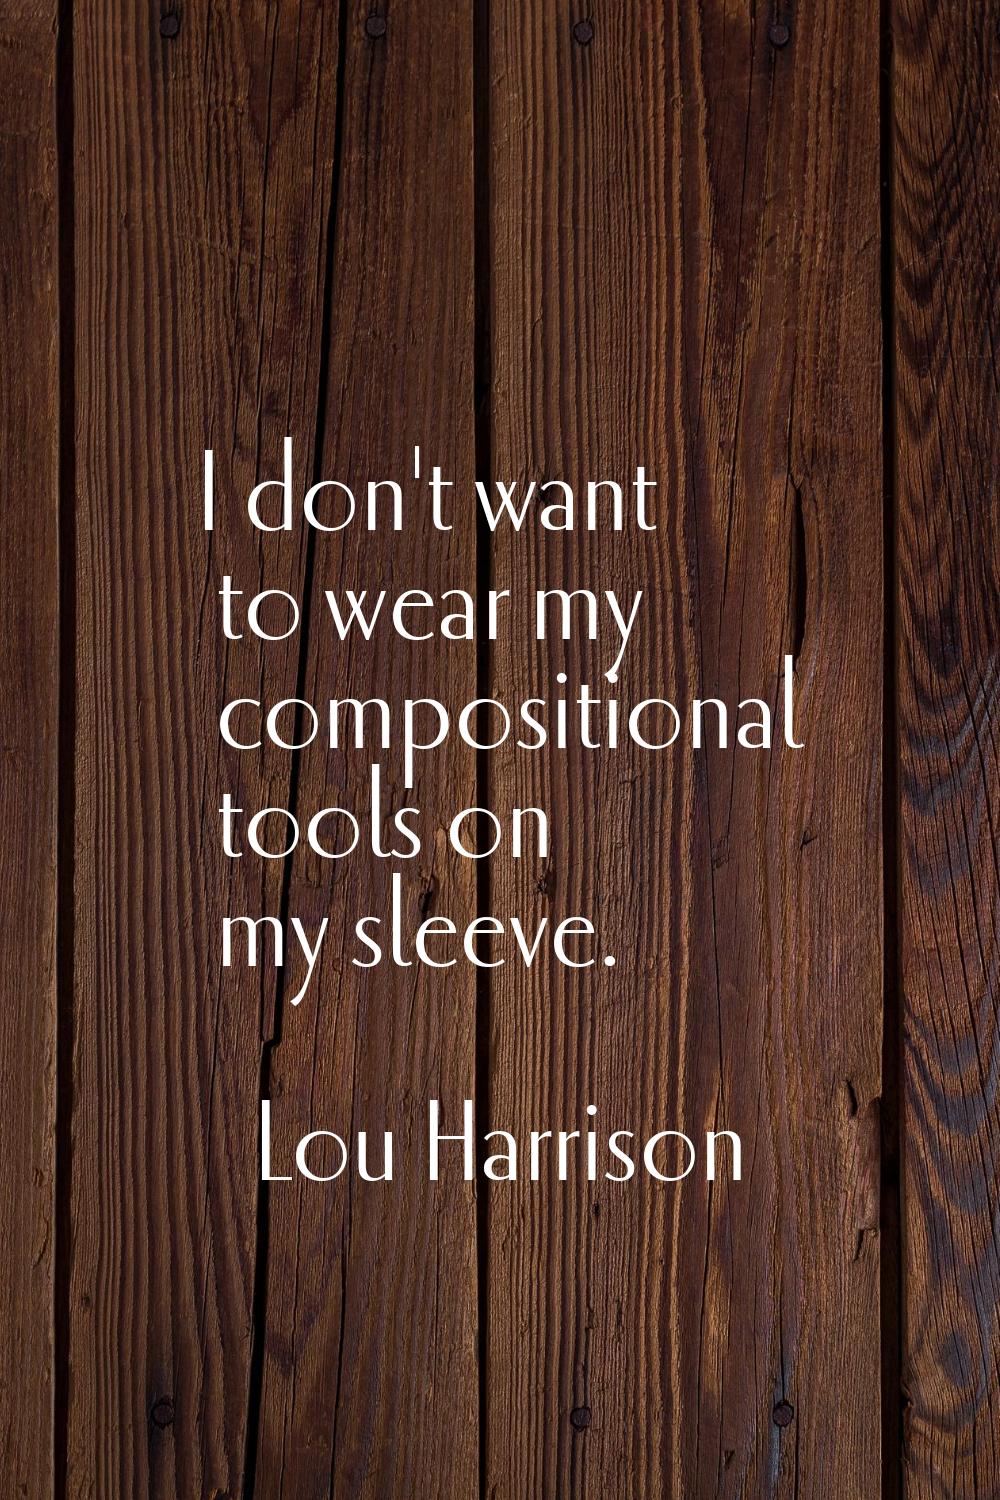 I don't want to wear my compositional tools on my sleeve.